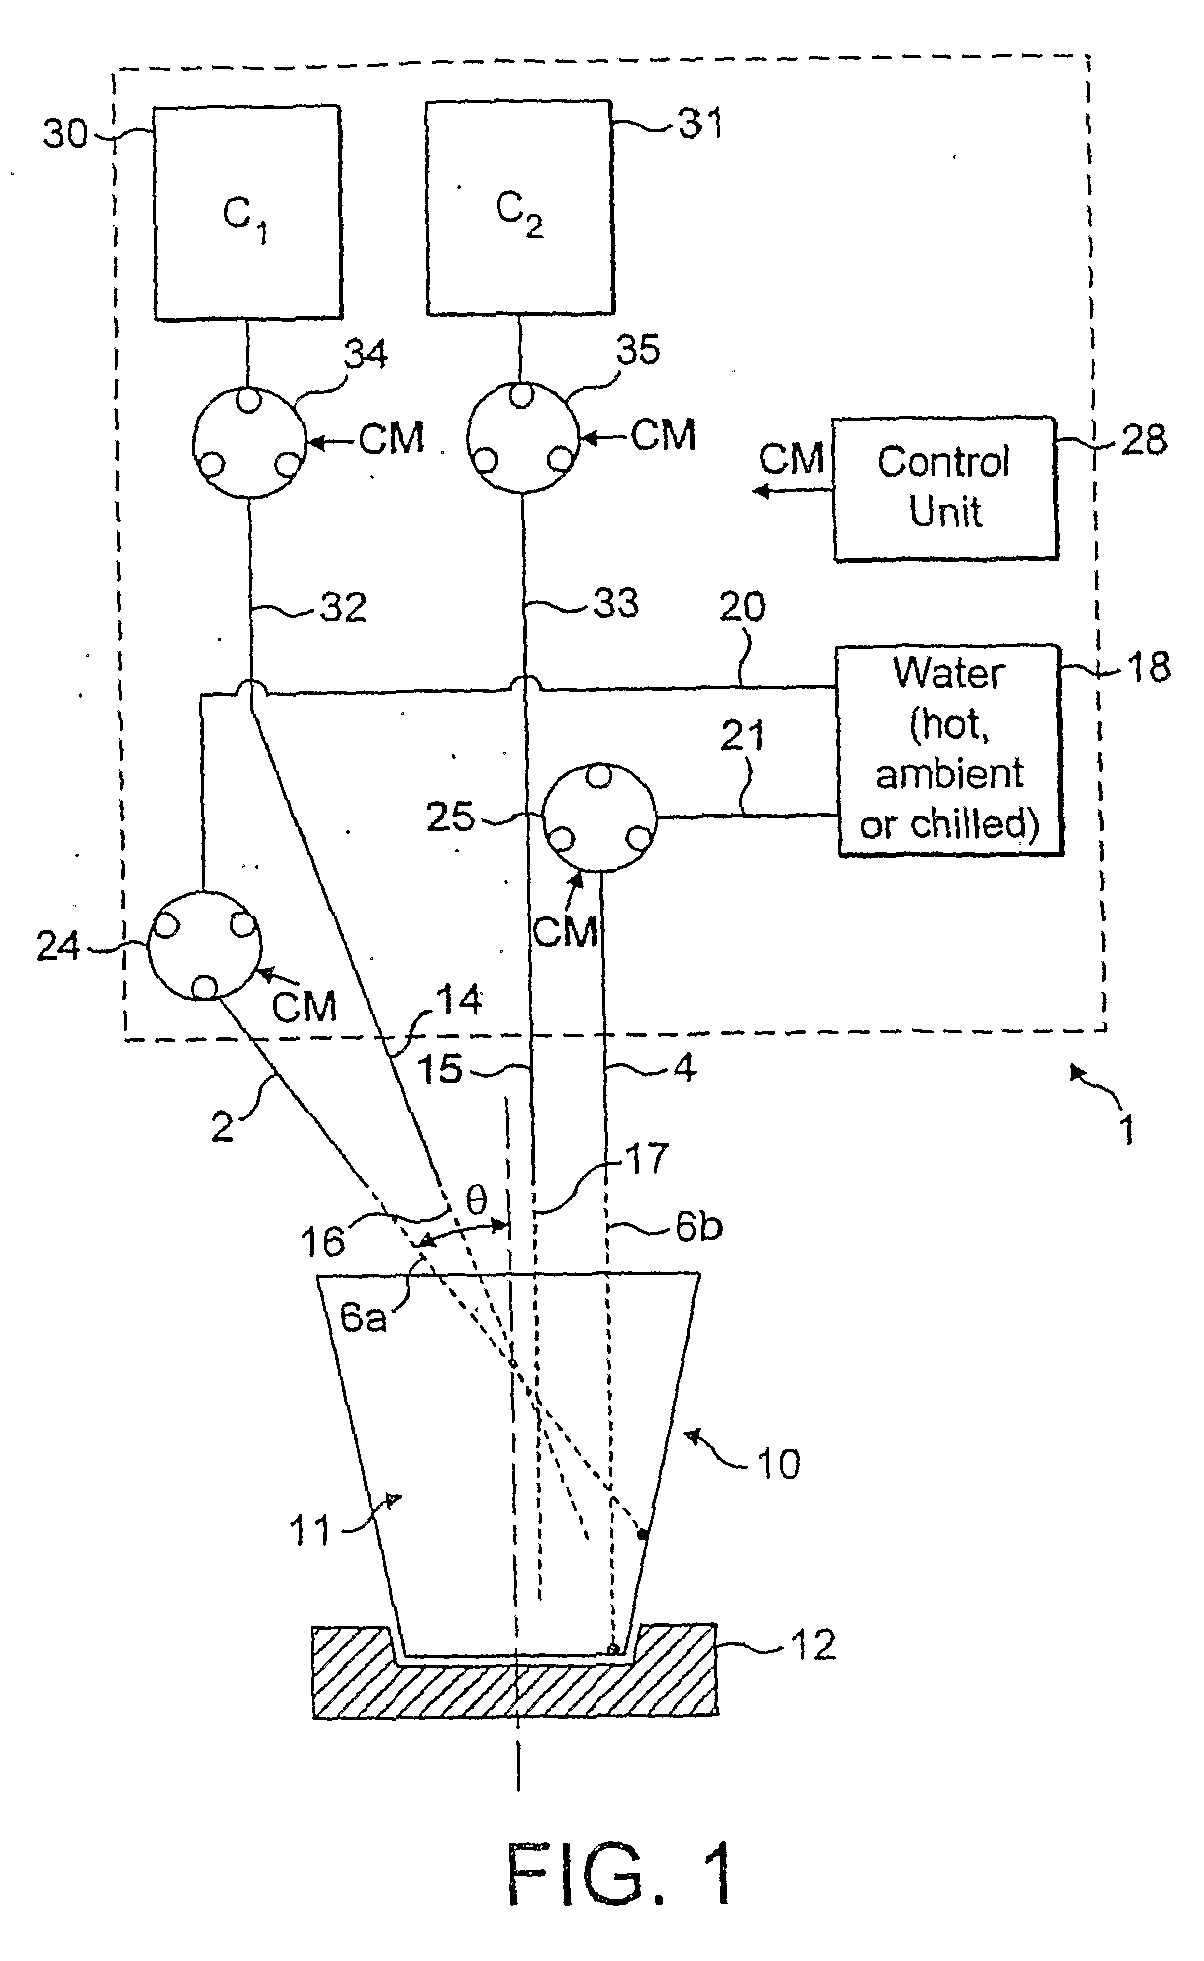 Method and System for in-Cup Dispensing, Mixing and Foaming Hot and Cold Beverages From Liquid Concentrate